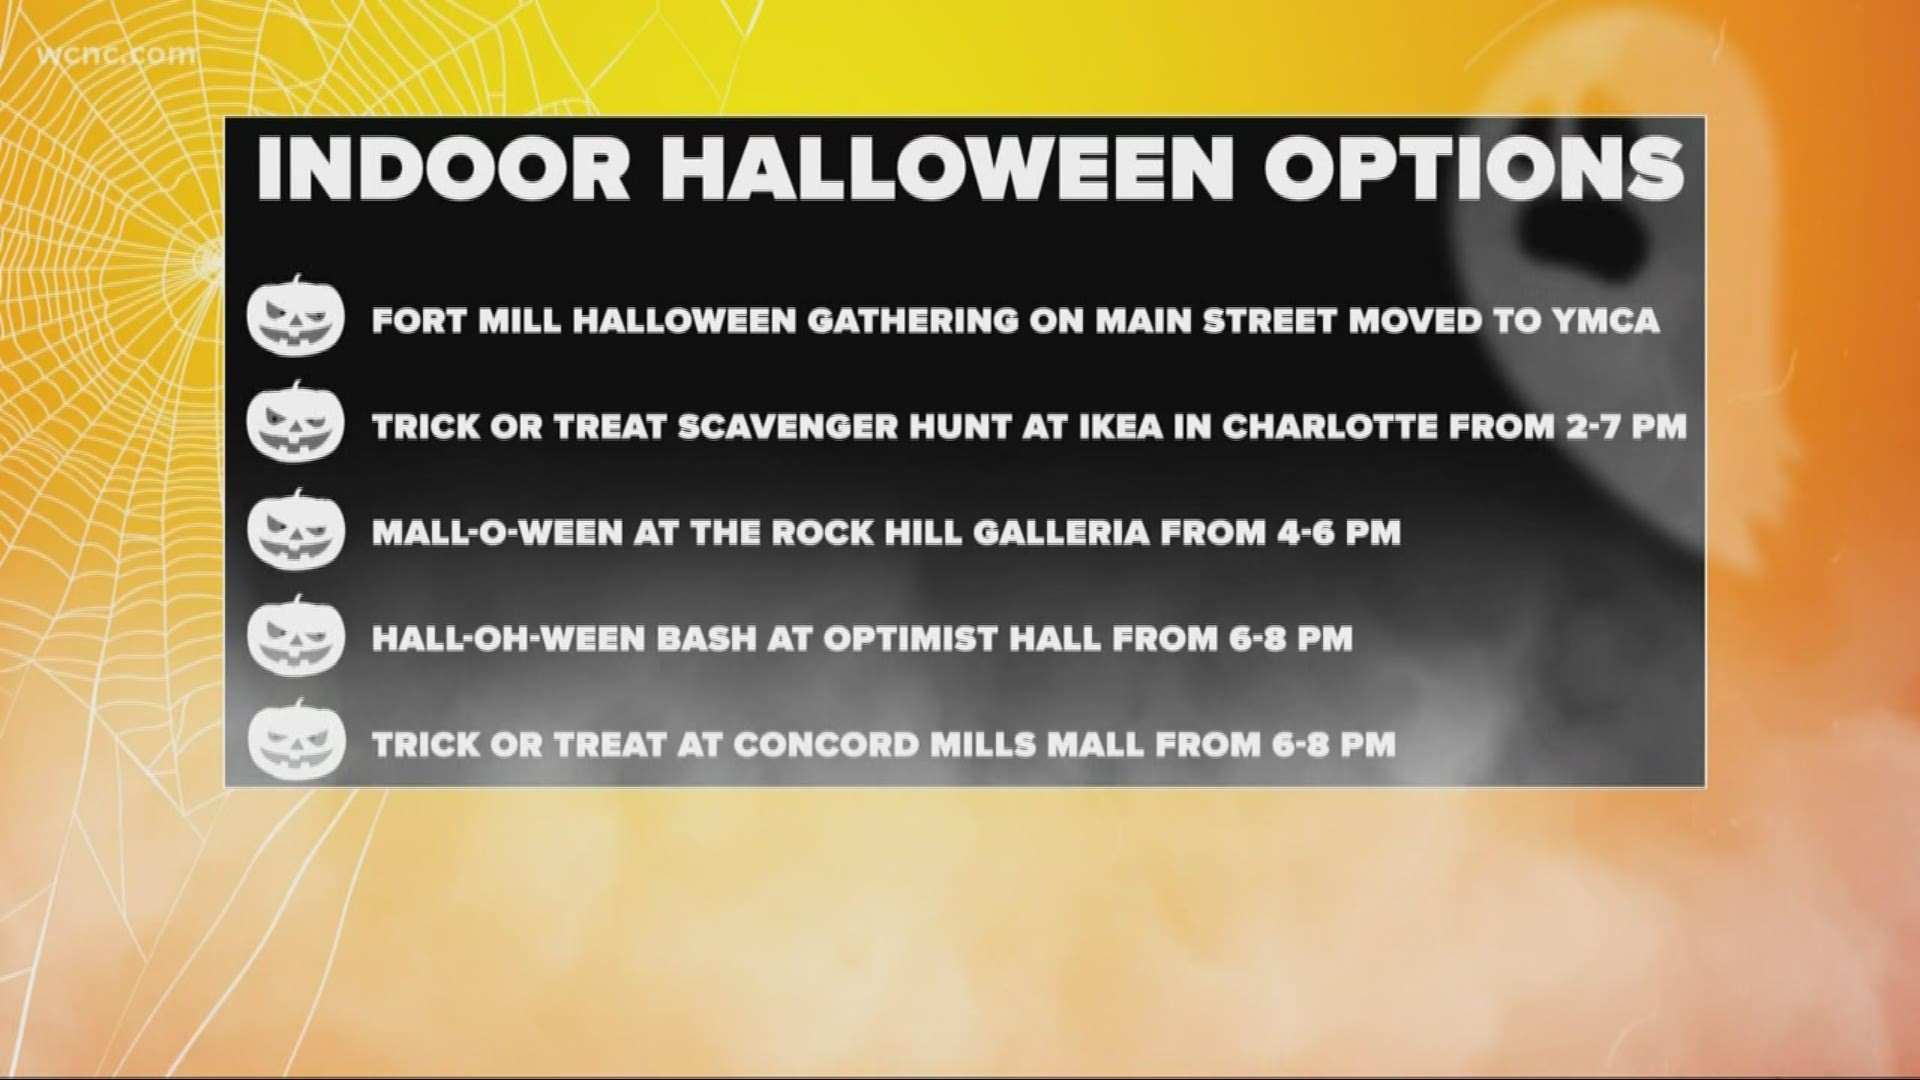 Meteorologist Iisha Scott is tracking the latest Halloween forecast, as well as some indoor options for families.